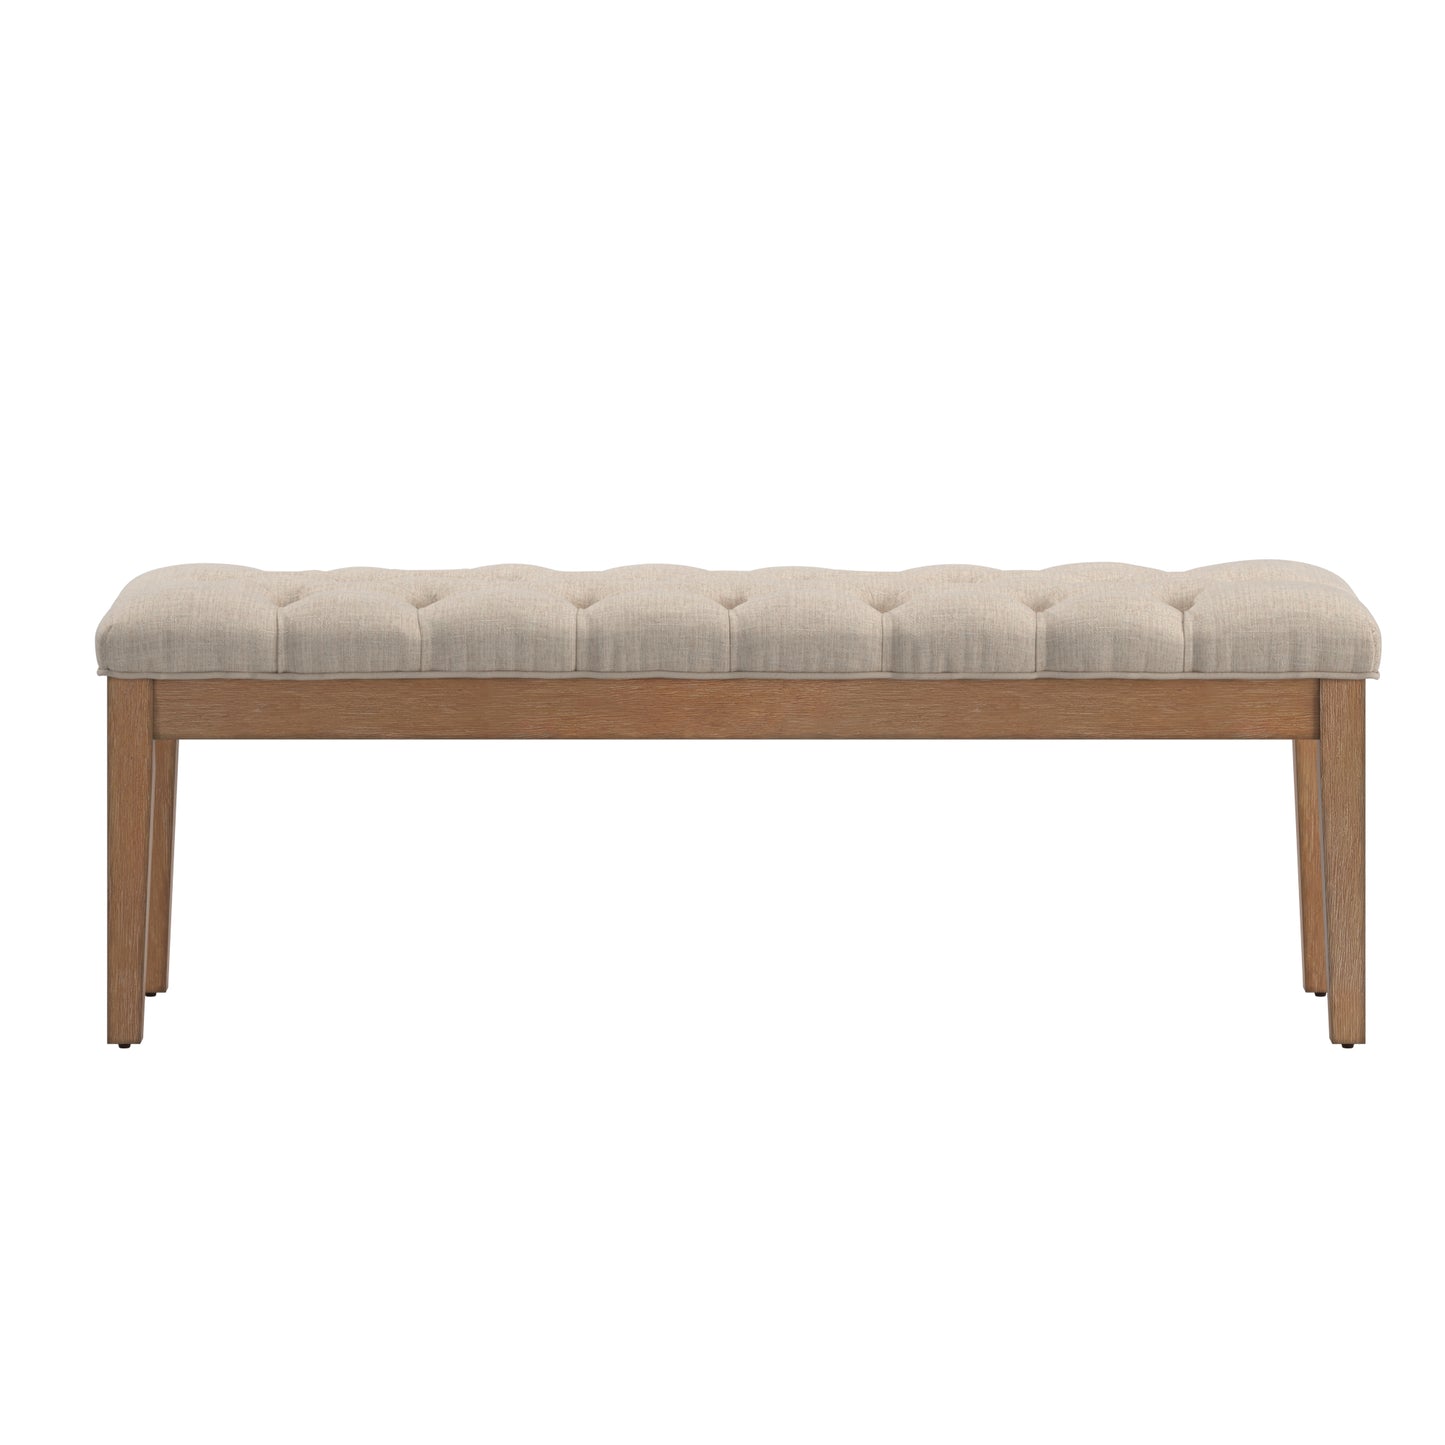 Premium Tufted Reclaimed 52-inch Upholstered Bench - Beige